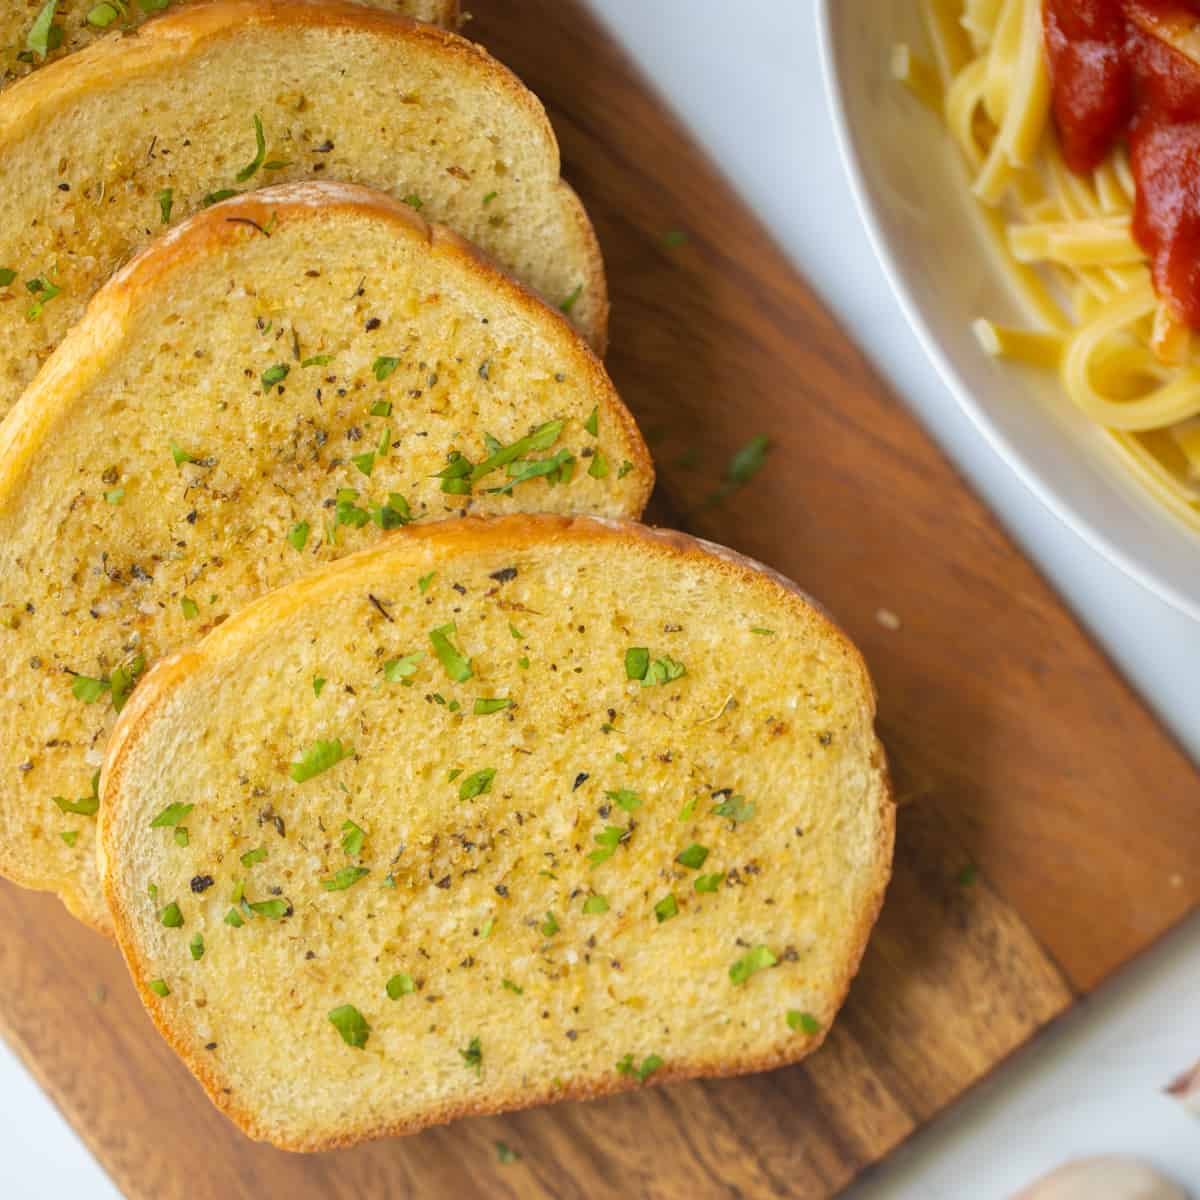 How To Make Fresh Garlic Bread at Home in a Toaster Oven